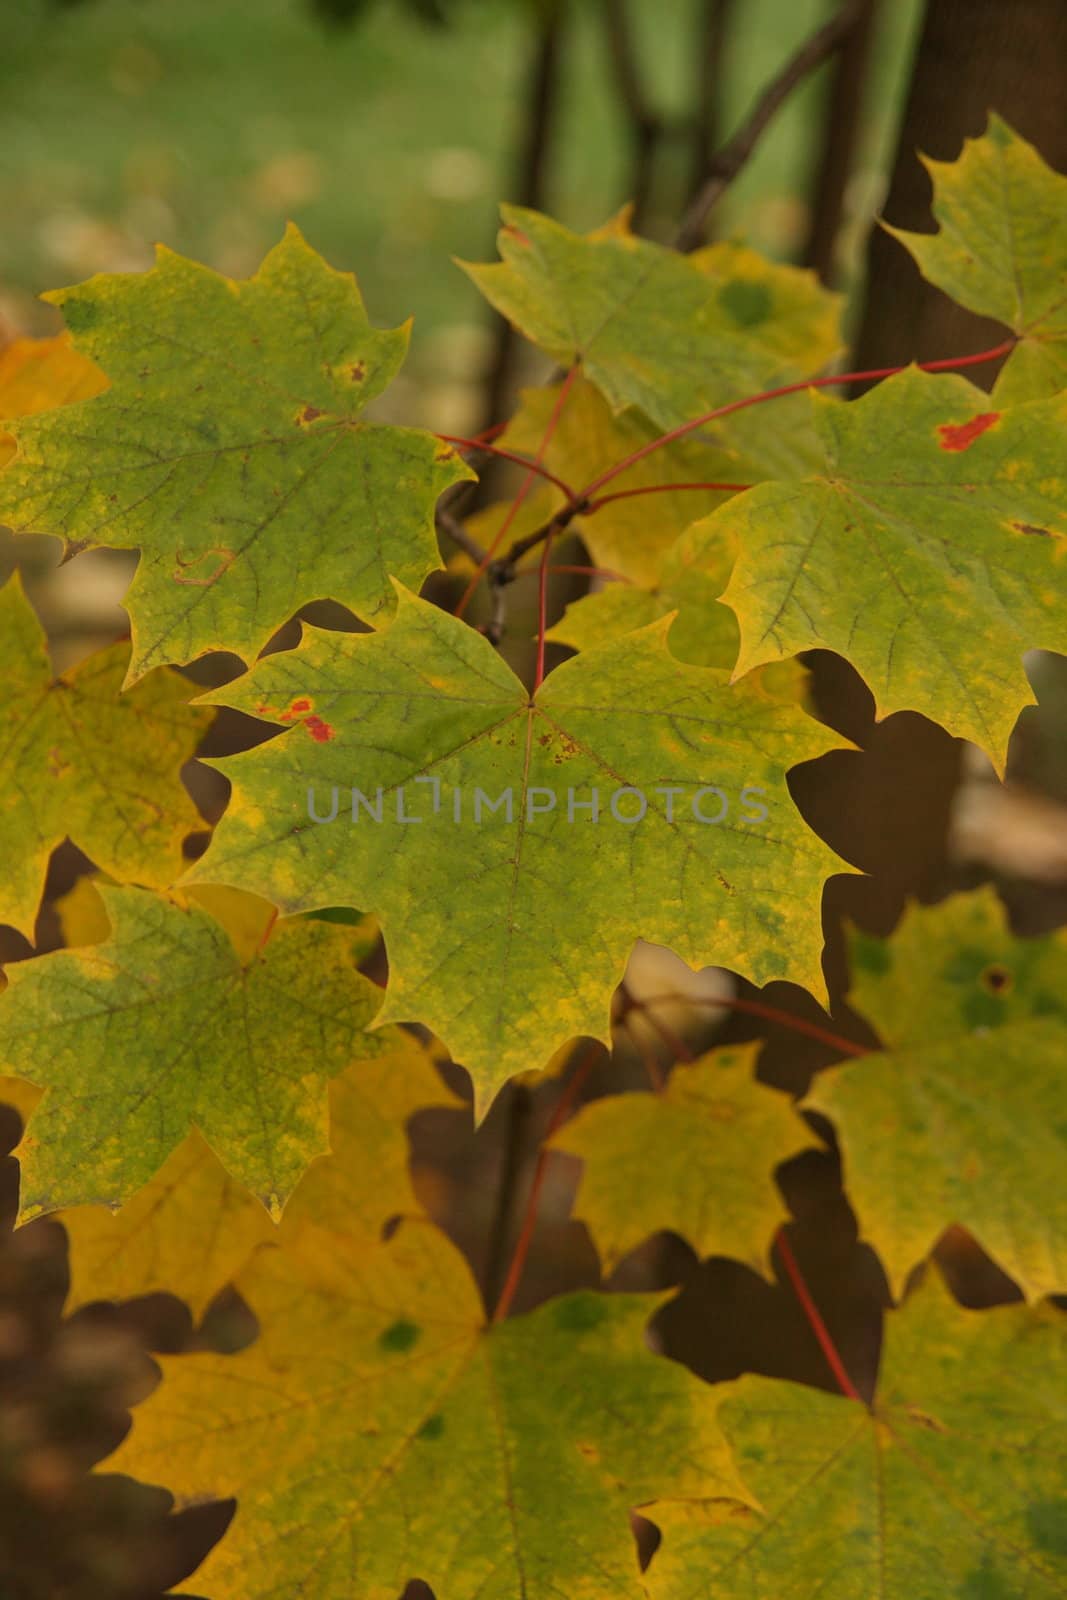 Some green maple leaves with yellow rims